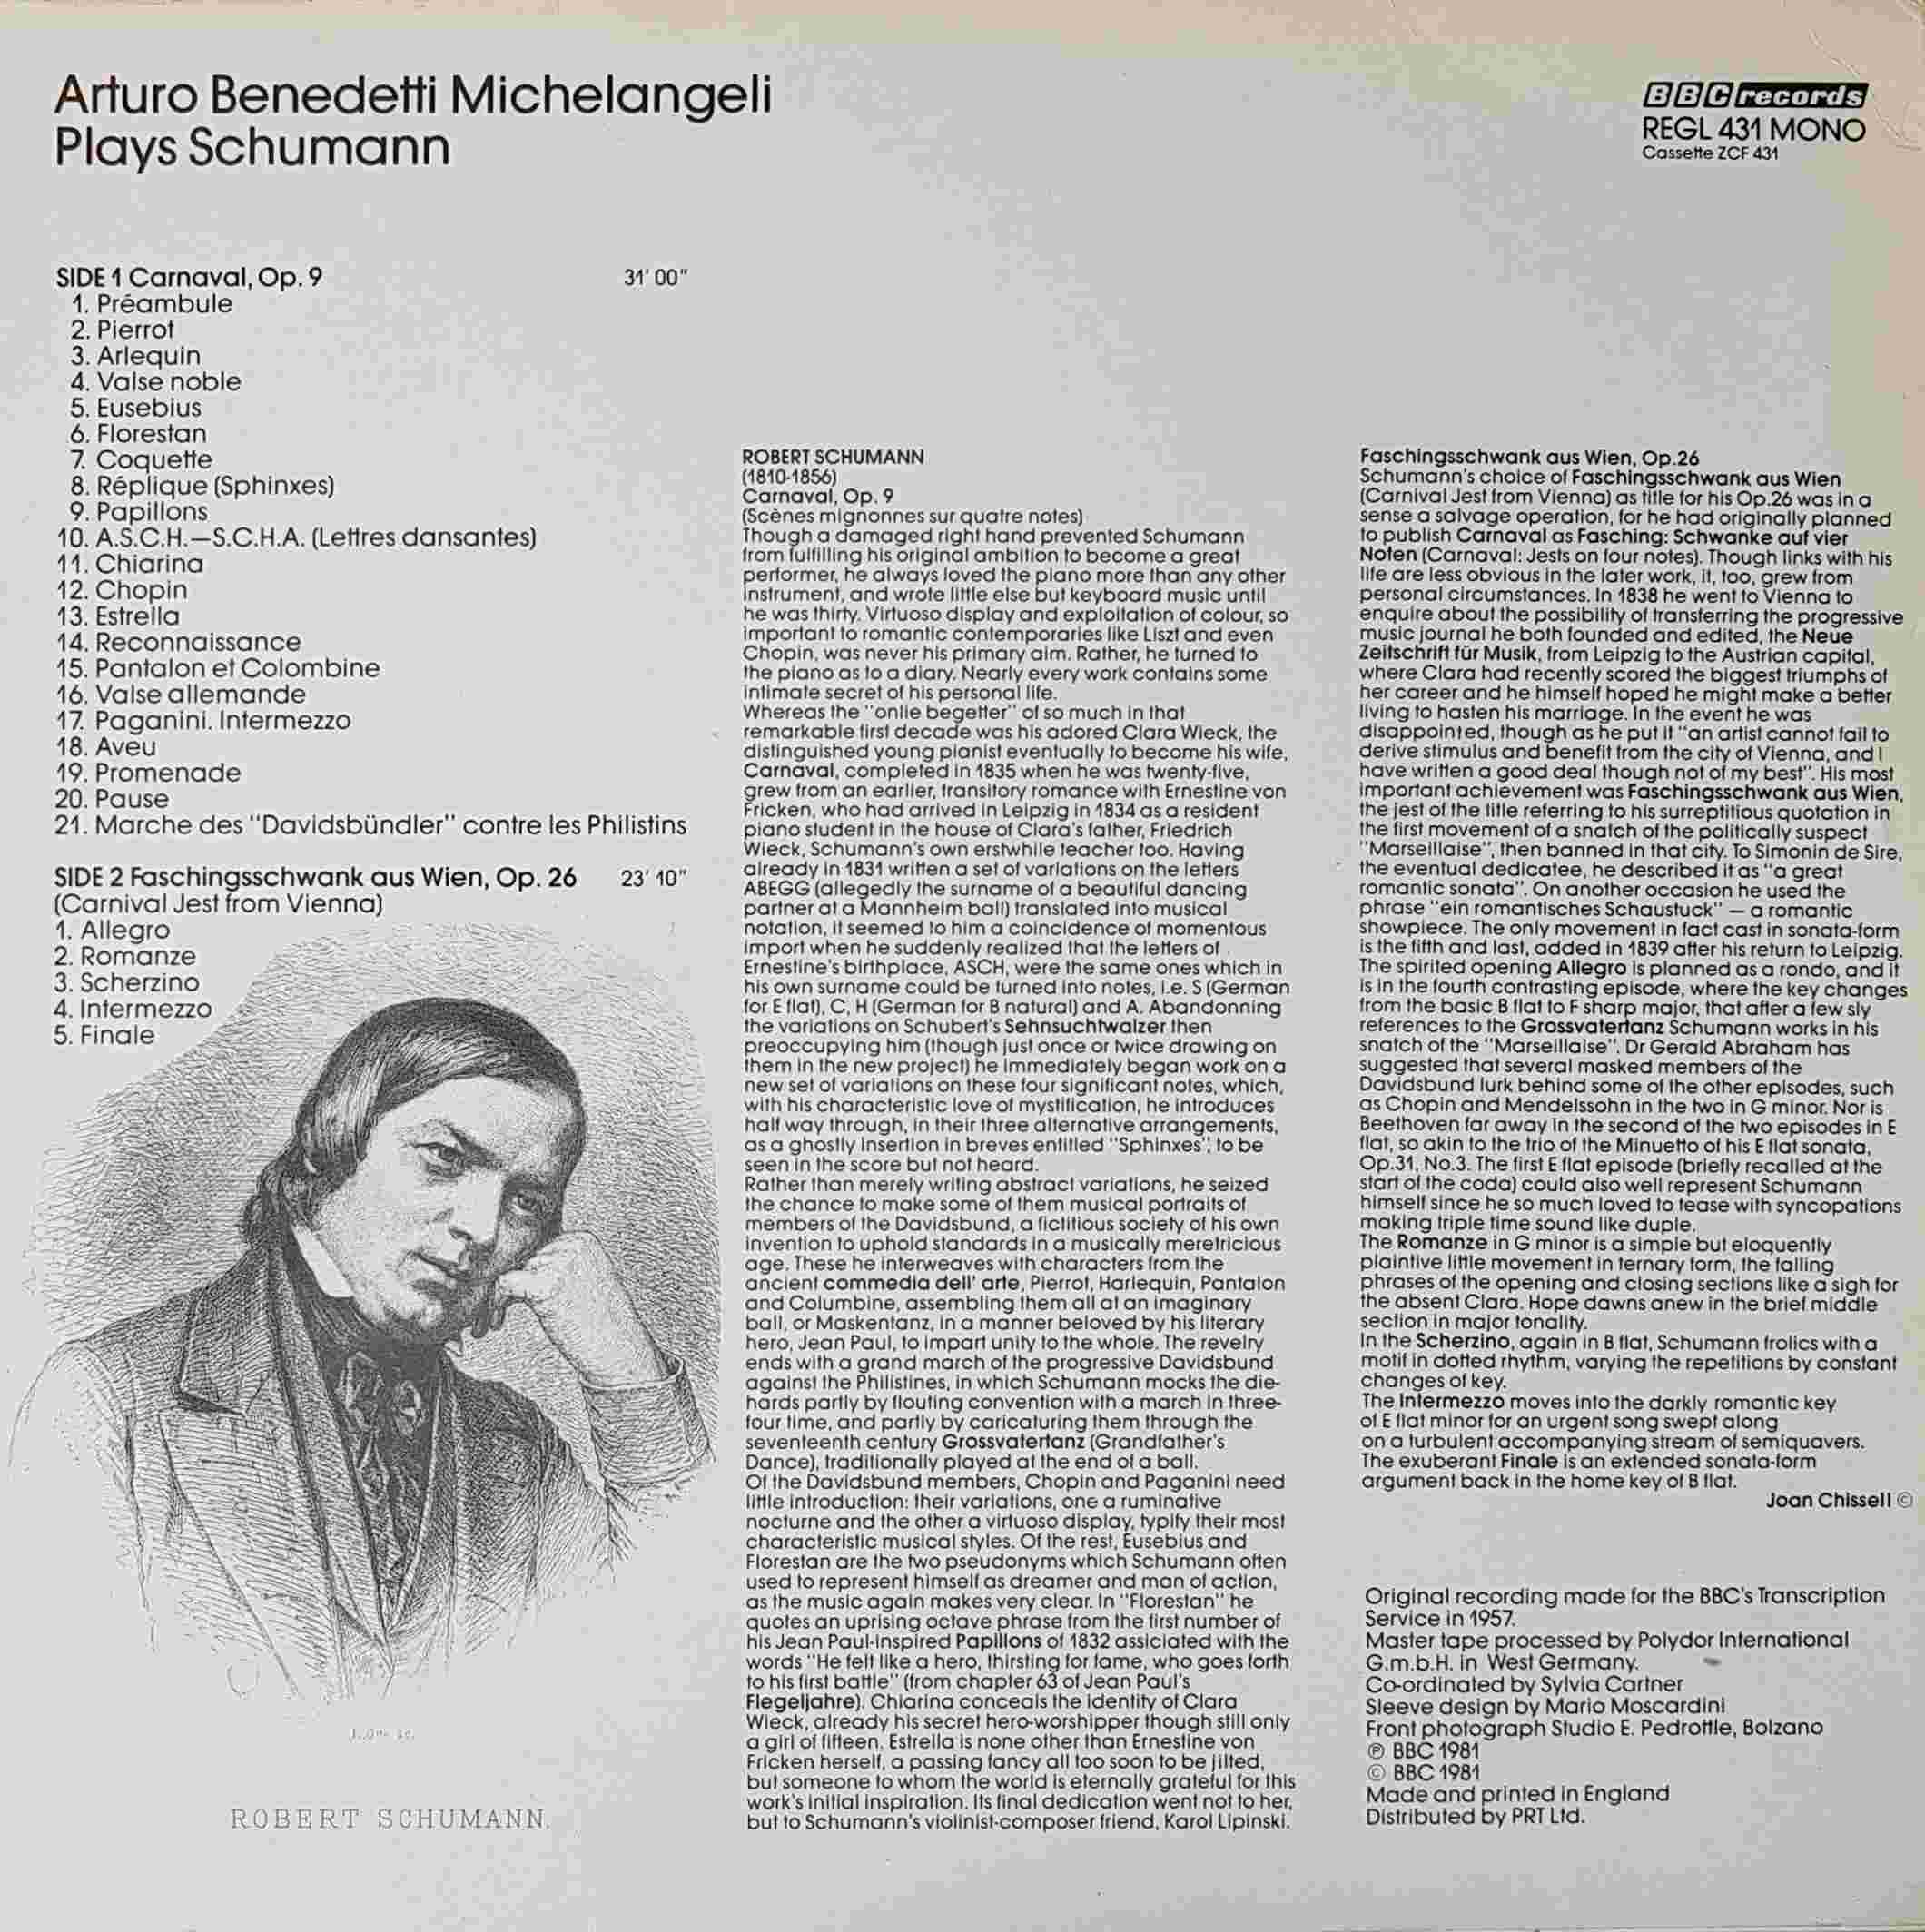 Picture of REGL 431 Arturo Benedetti Michelangeli plays Schumann by artist Arturo Benedetti Michelangeli from the BBC records and Tapes library